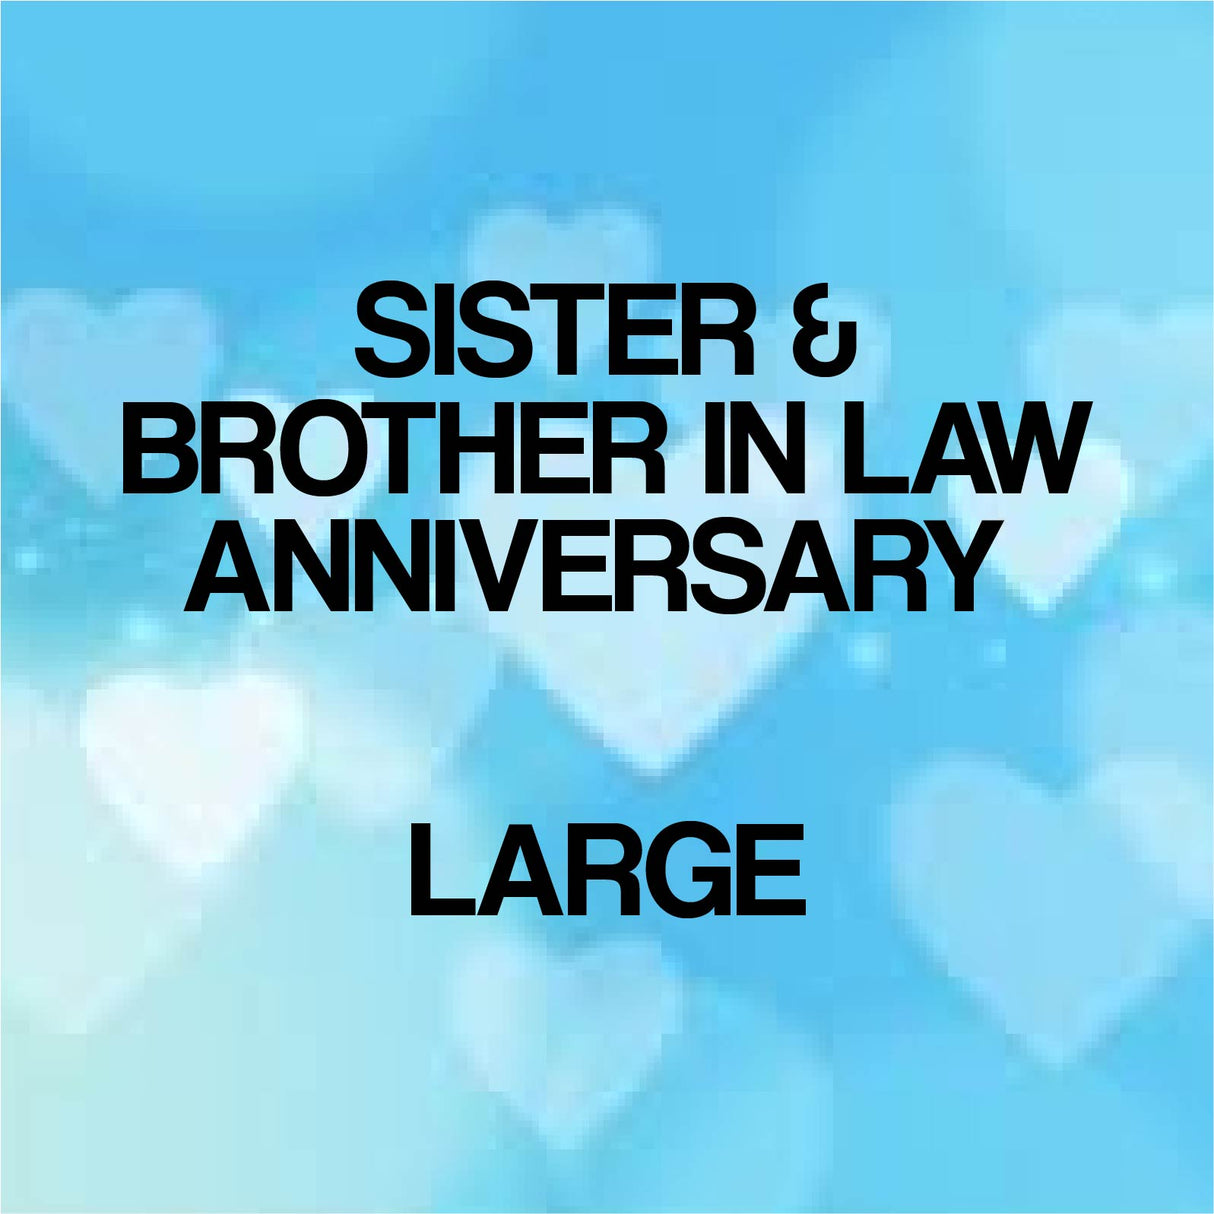 Sister & Brother In Law Anniversary